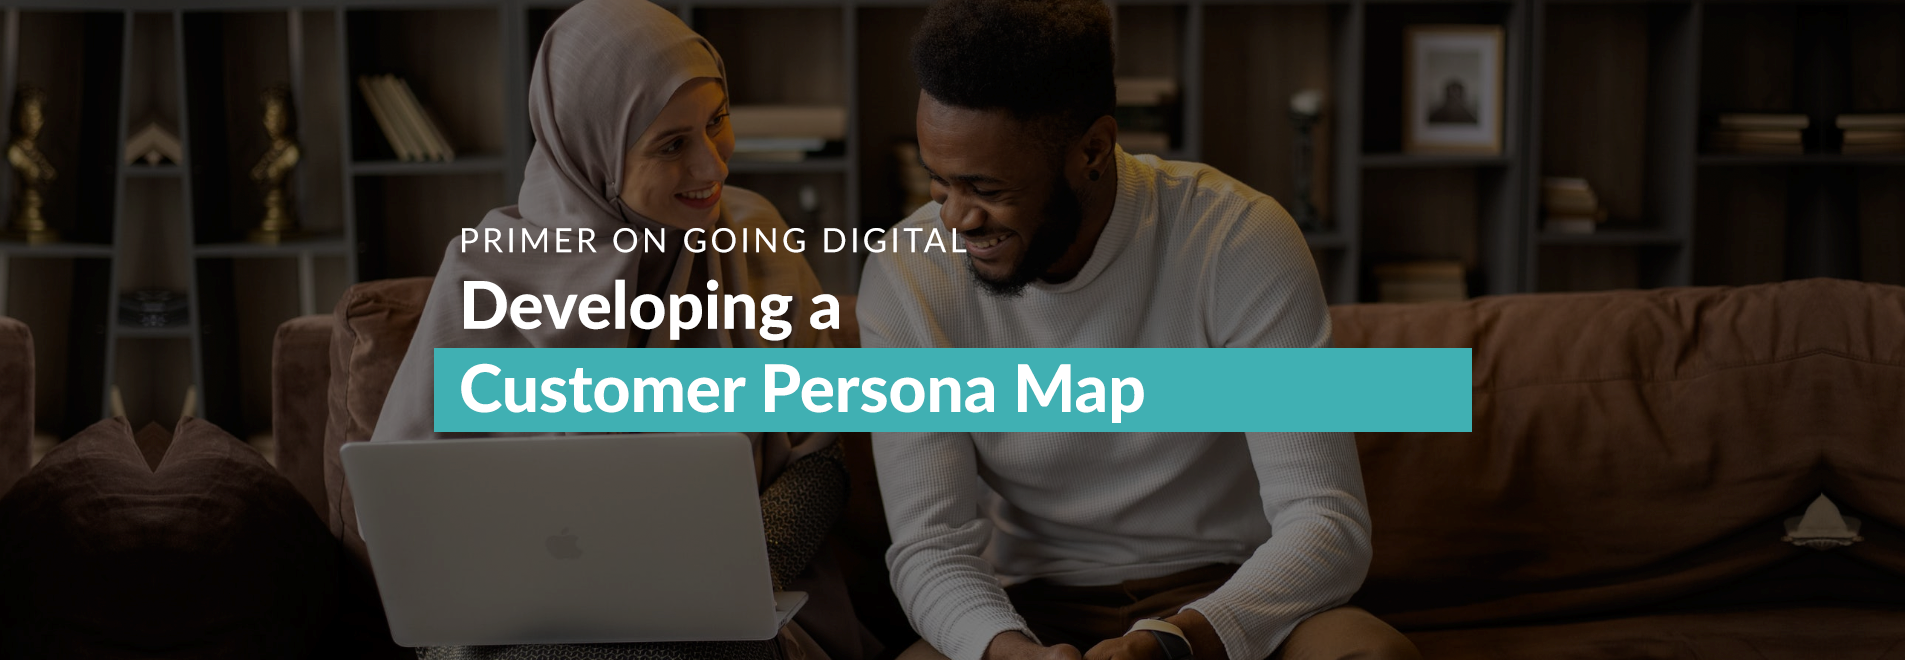 Banner: Developing a Customer Persona Map